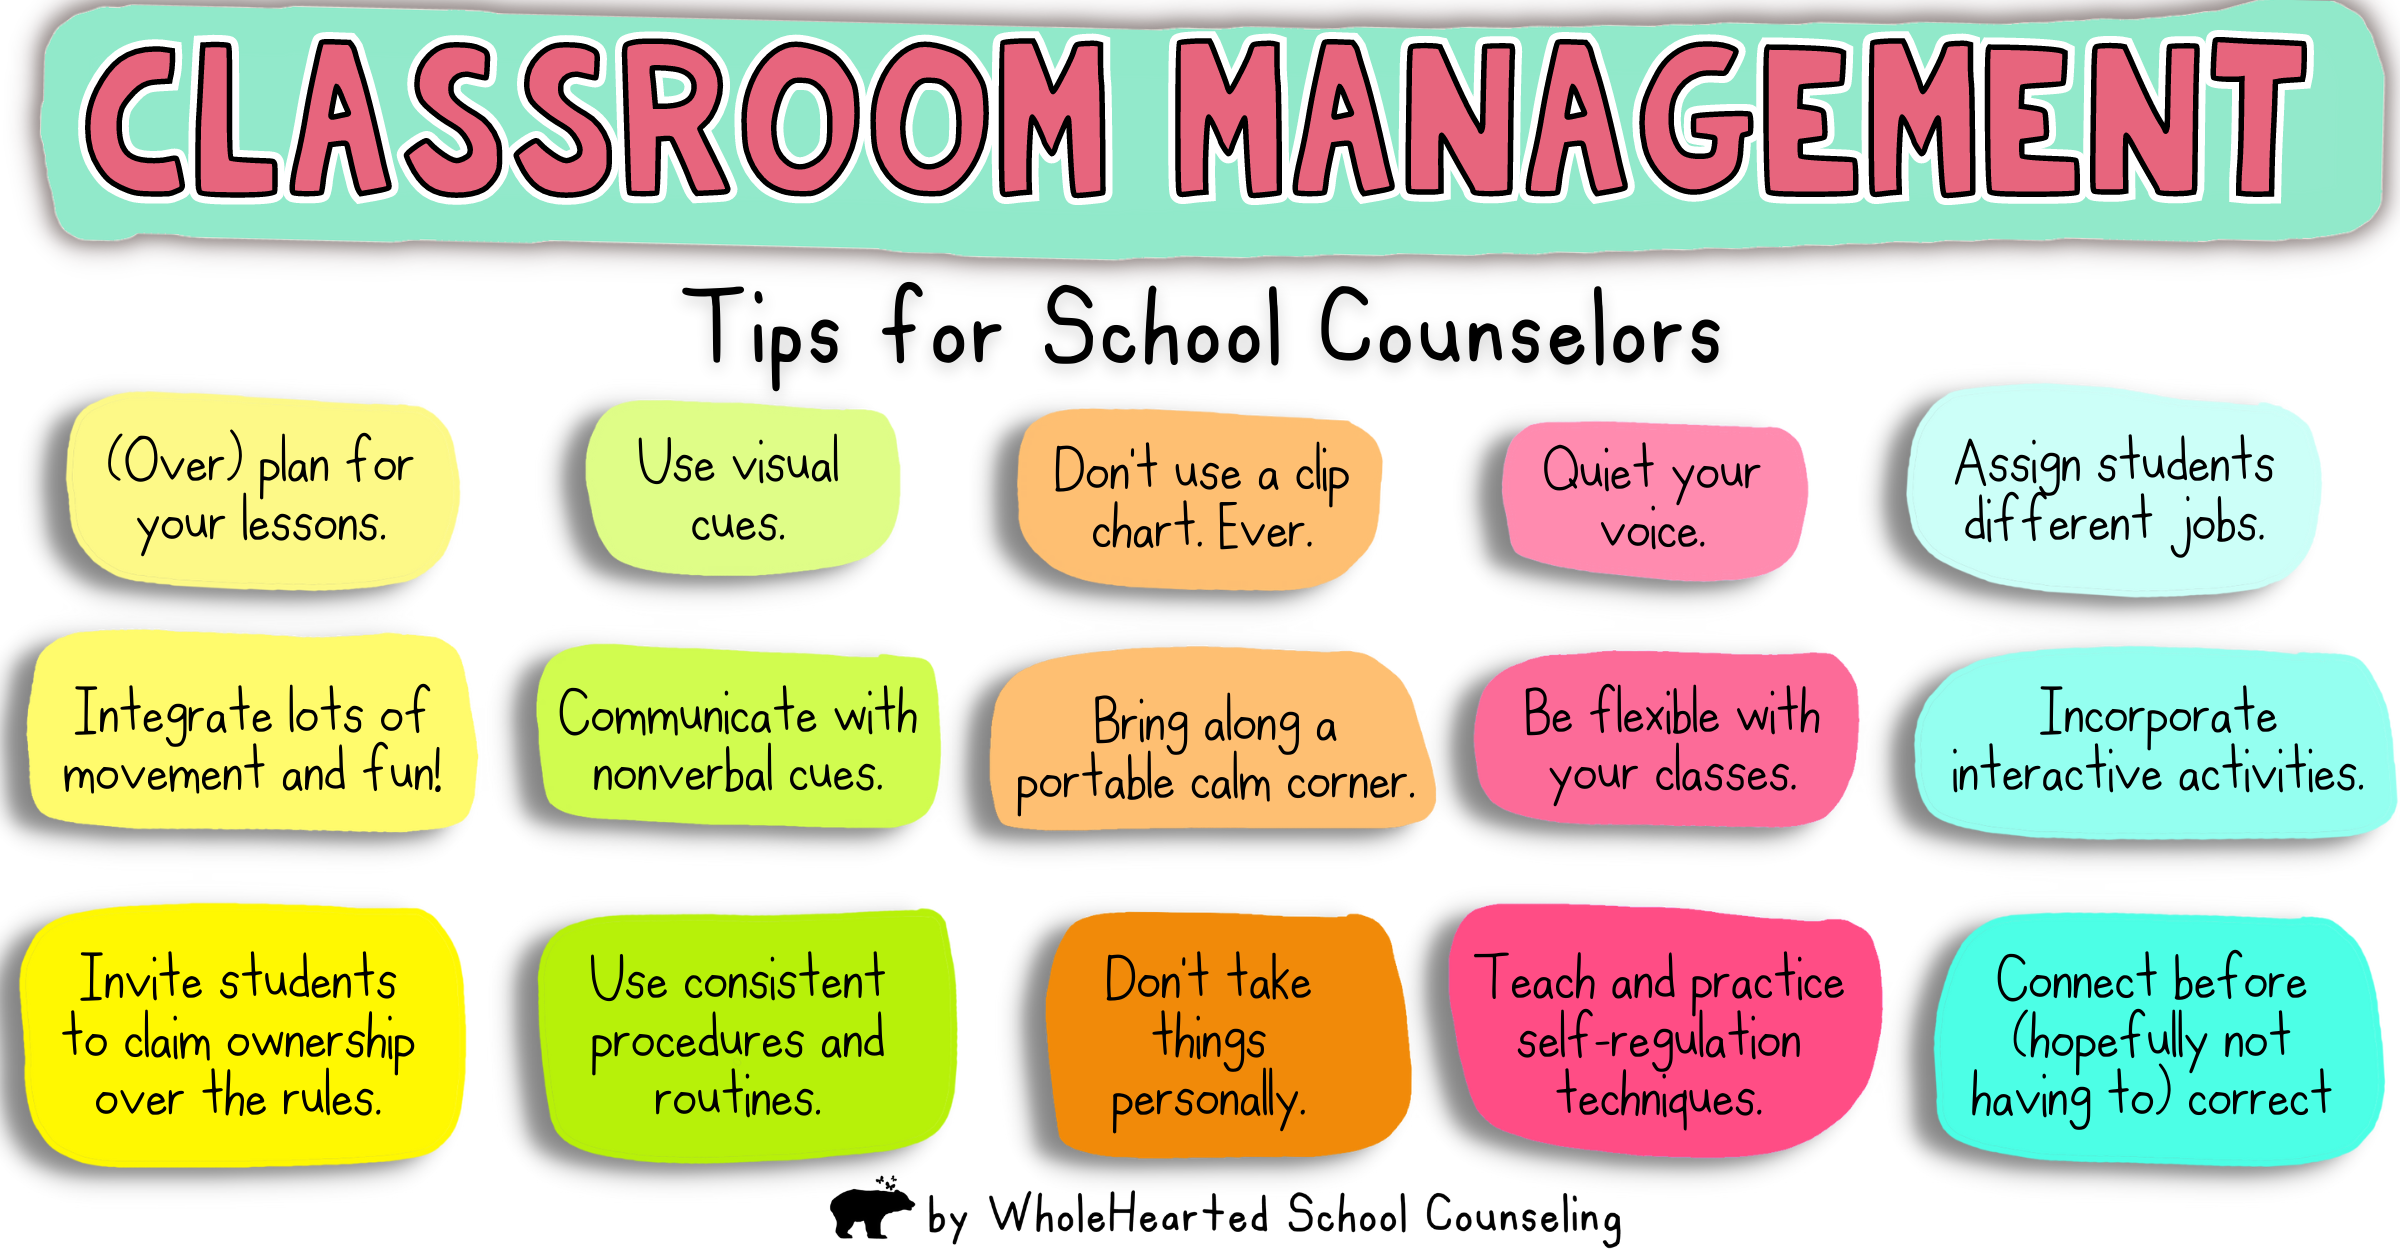 List of 15 Classroom Management Tips for School Counselors